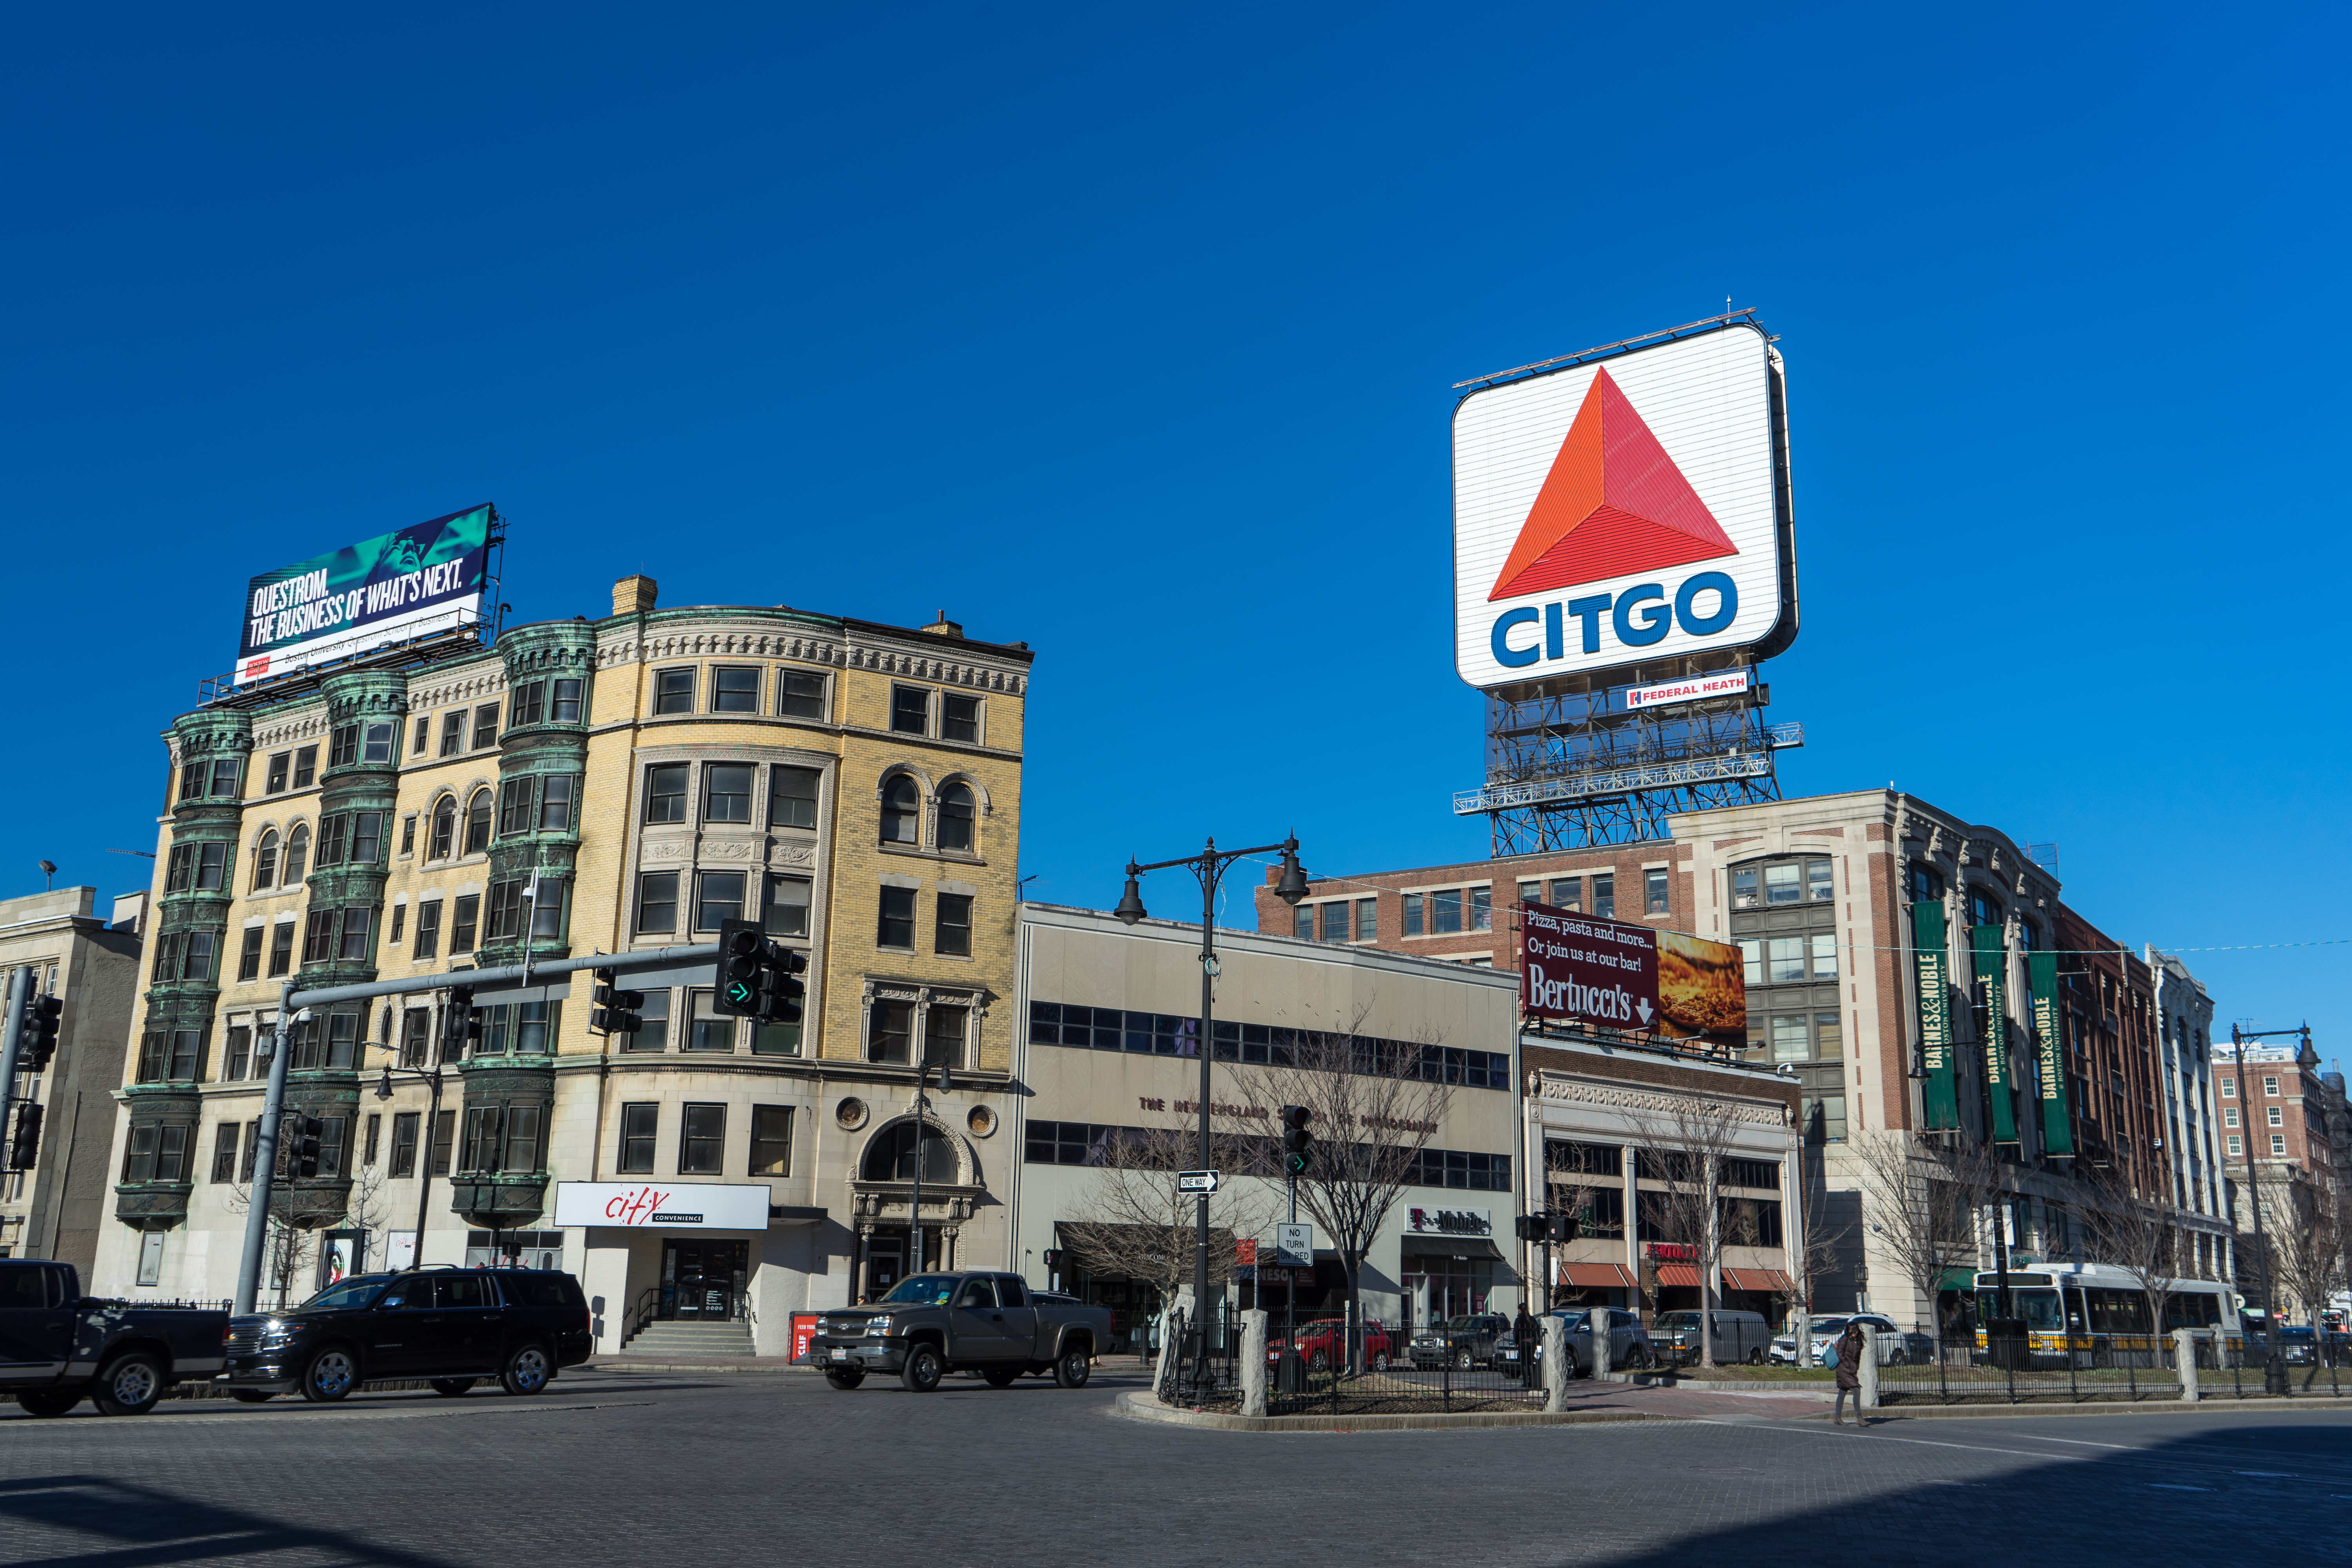 A row of various city buildings on a block in Boston. Above one of the buildings is a sign that reads: Citgo. There is a street in front of the buildings with cars.